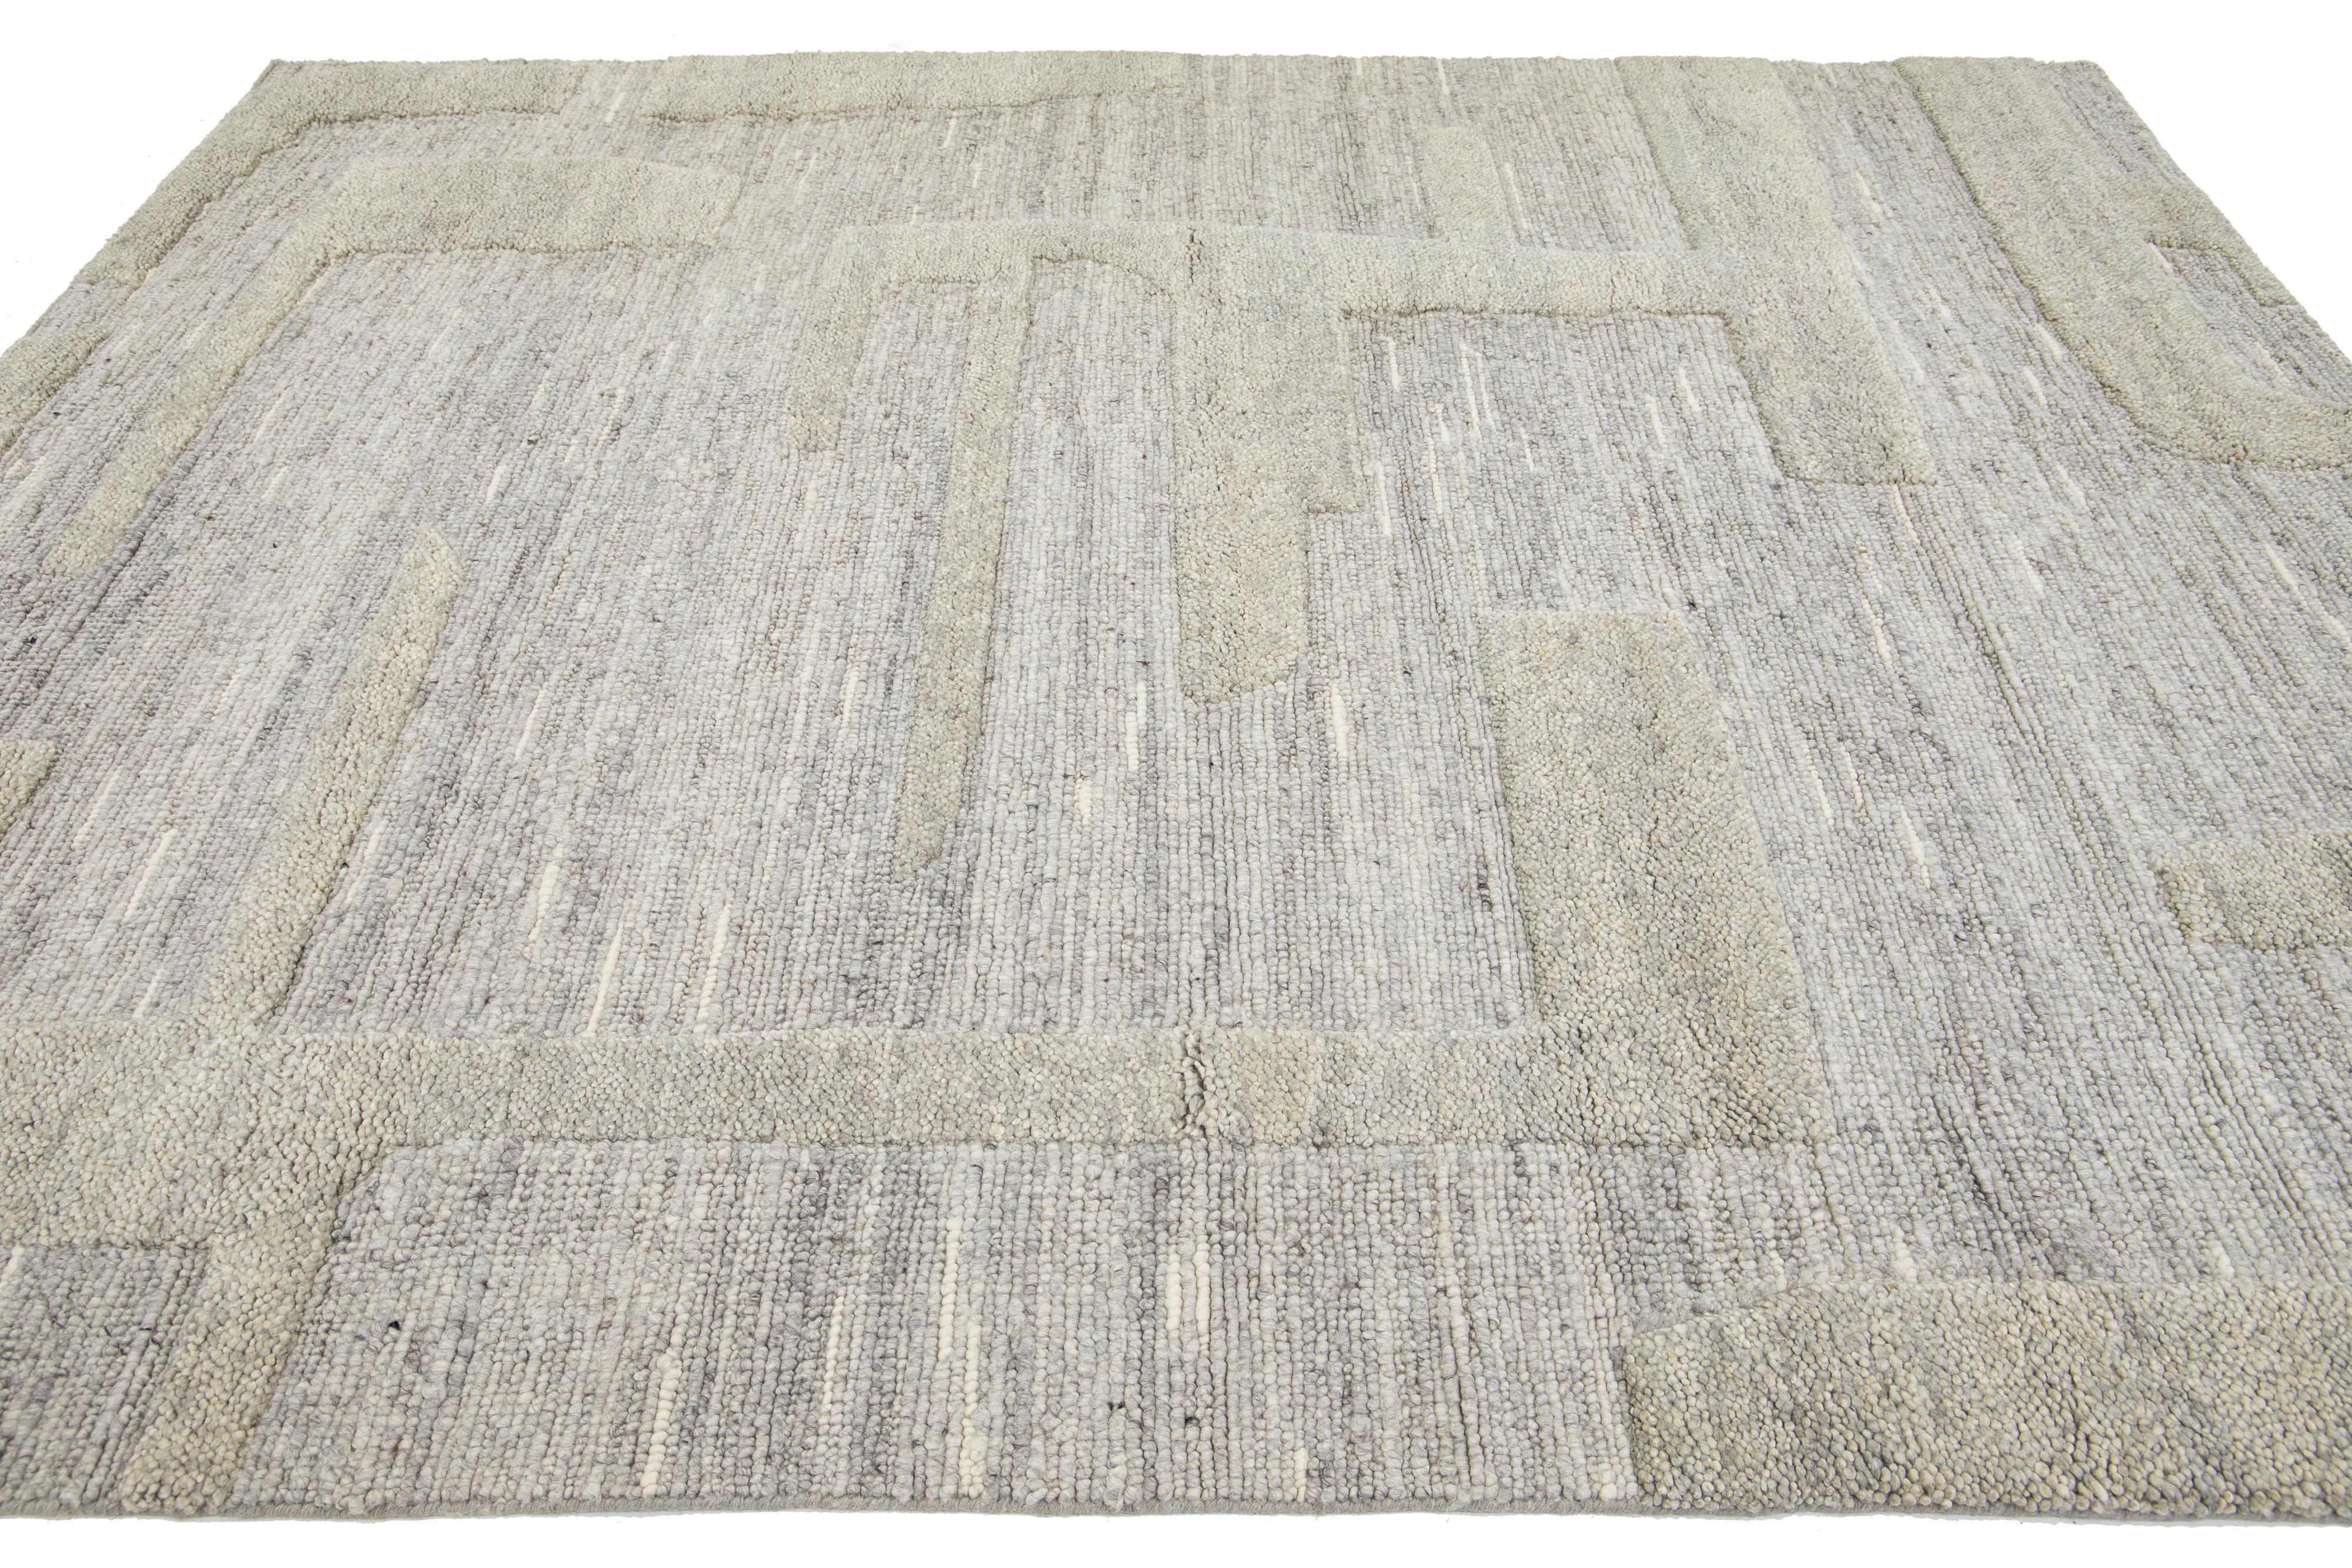 Hand-Knotted Contemporary Geometric Wool Rug Moroccan-Style In Natural Gray By Apadana For Sale